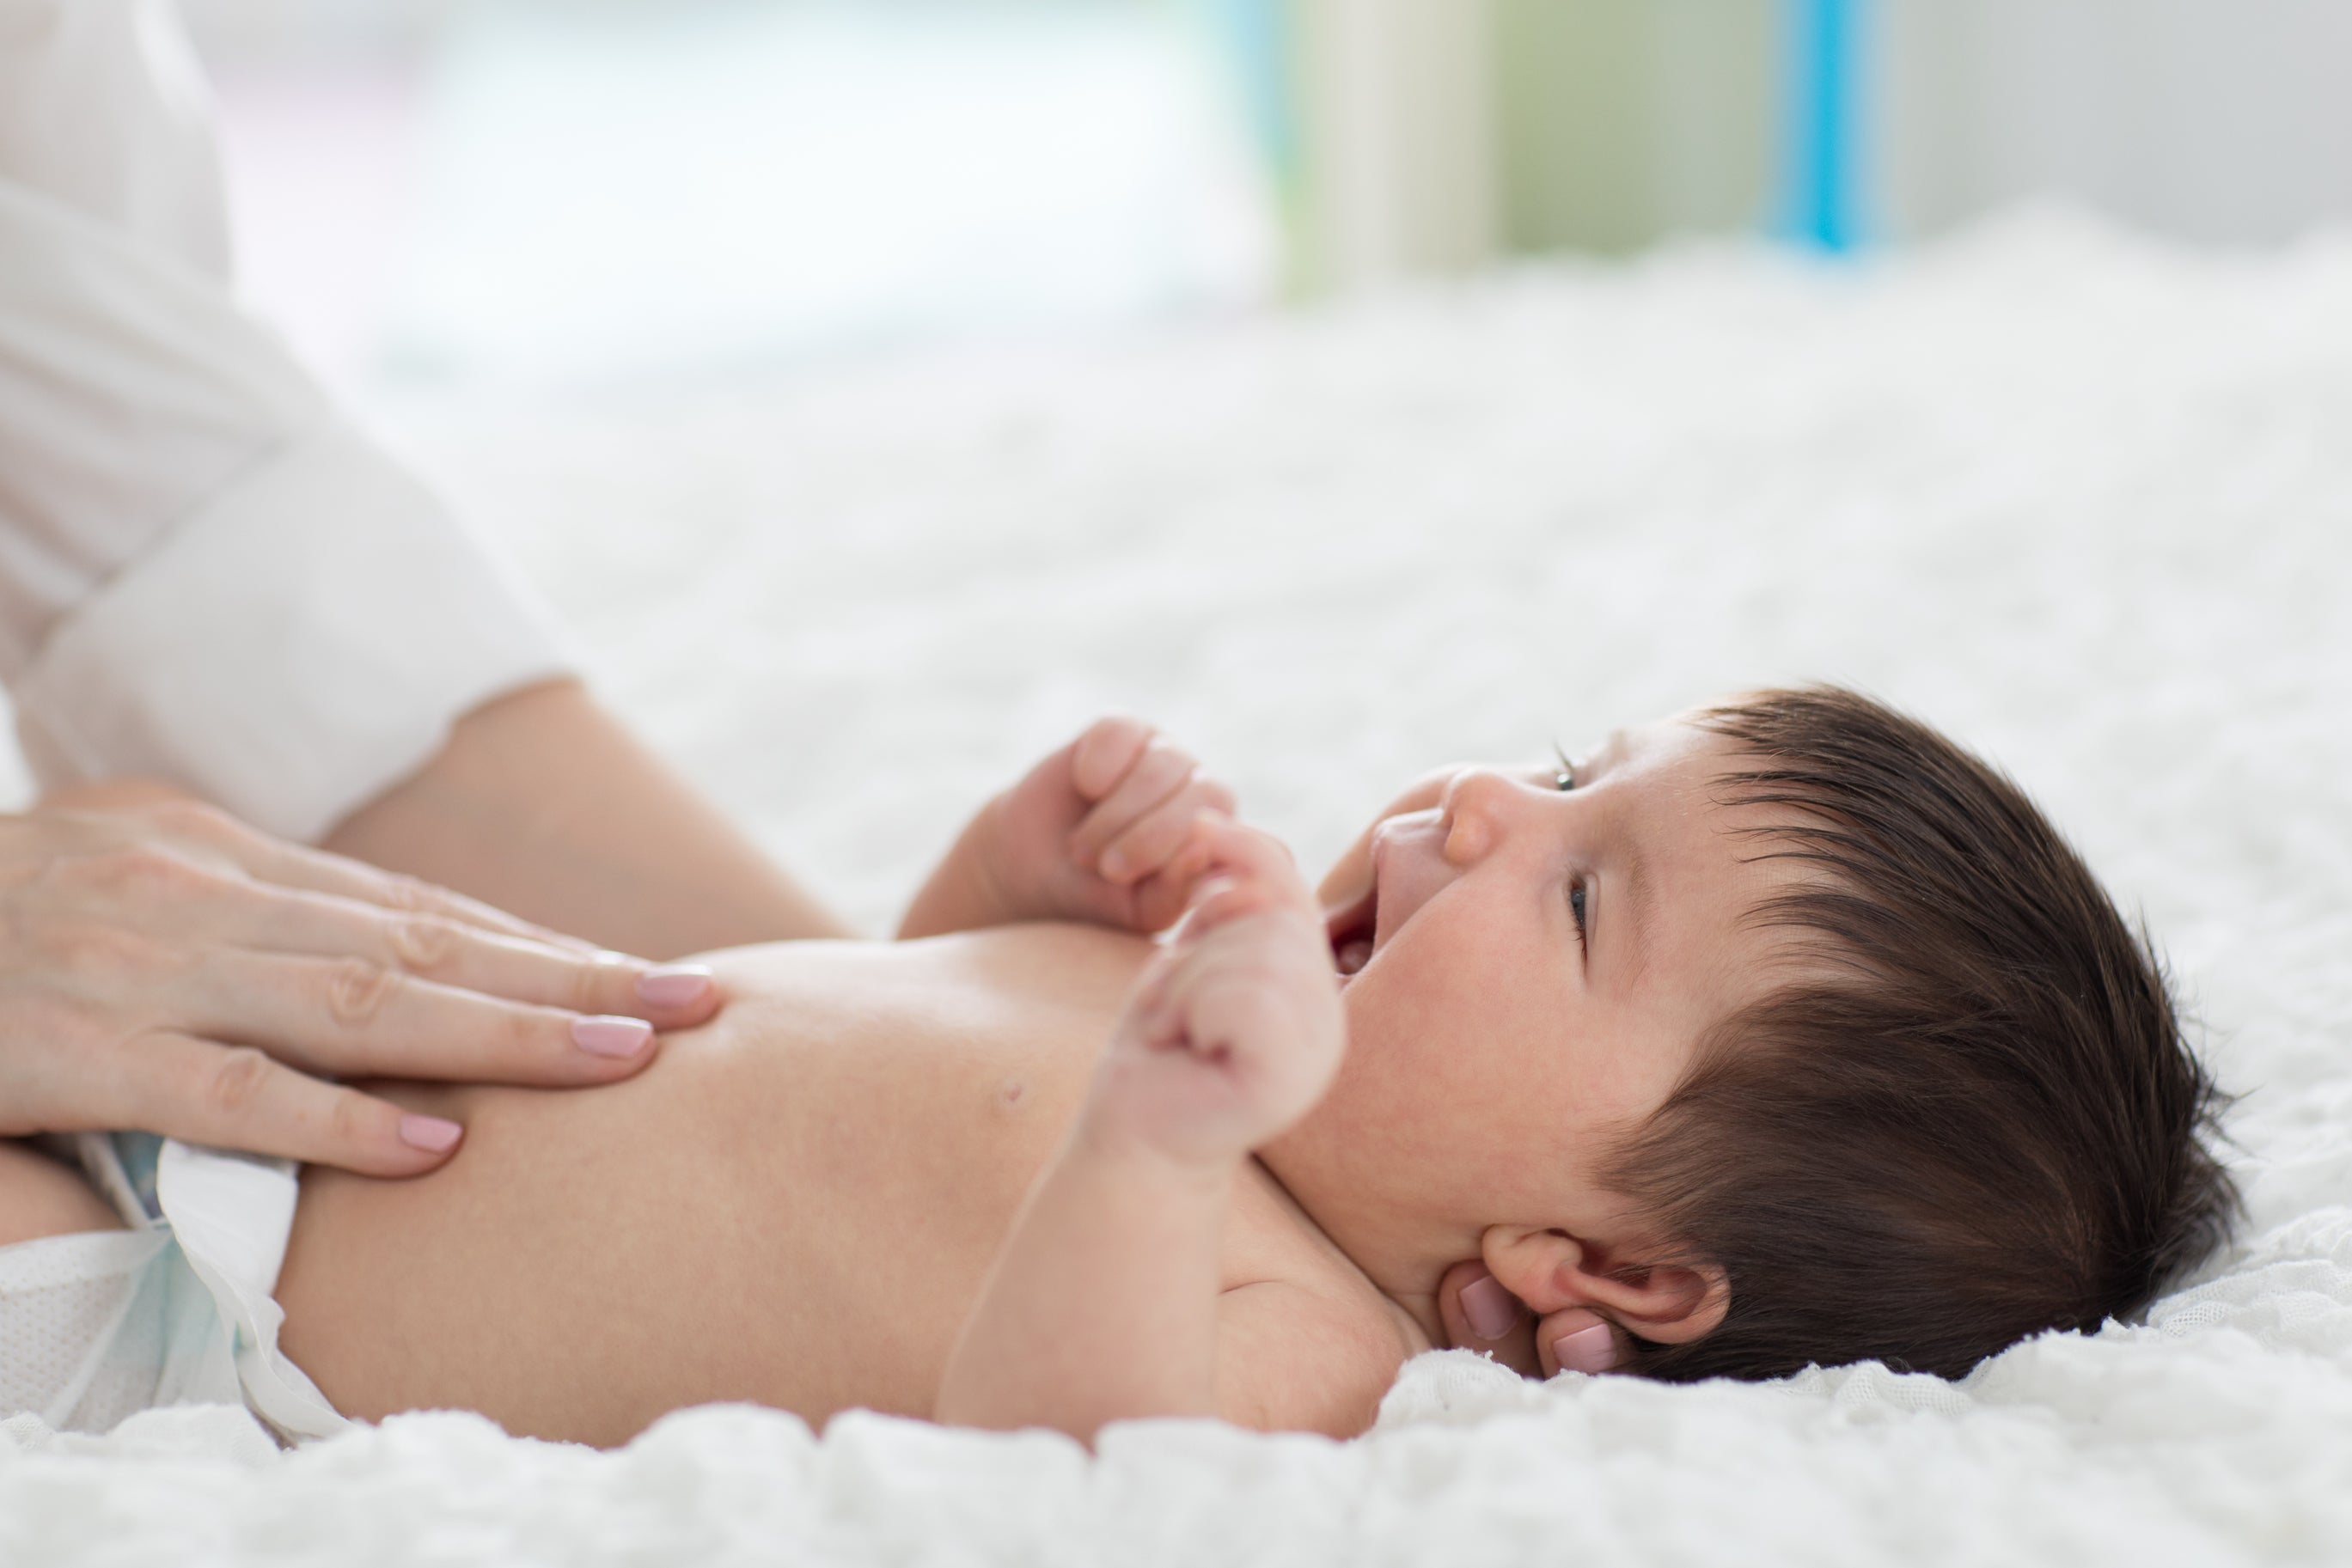 A mother applying baby lotion on her baby's tummy. Baby is lying on the bed. Concept of baby skin care, fragrance, fragrance free, harmful ingredients.